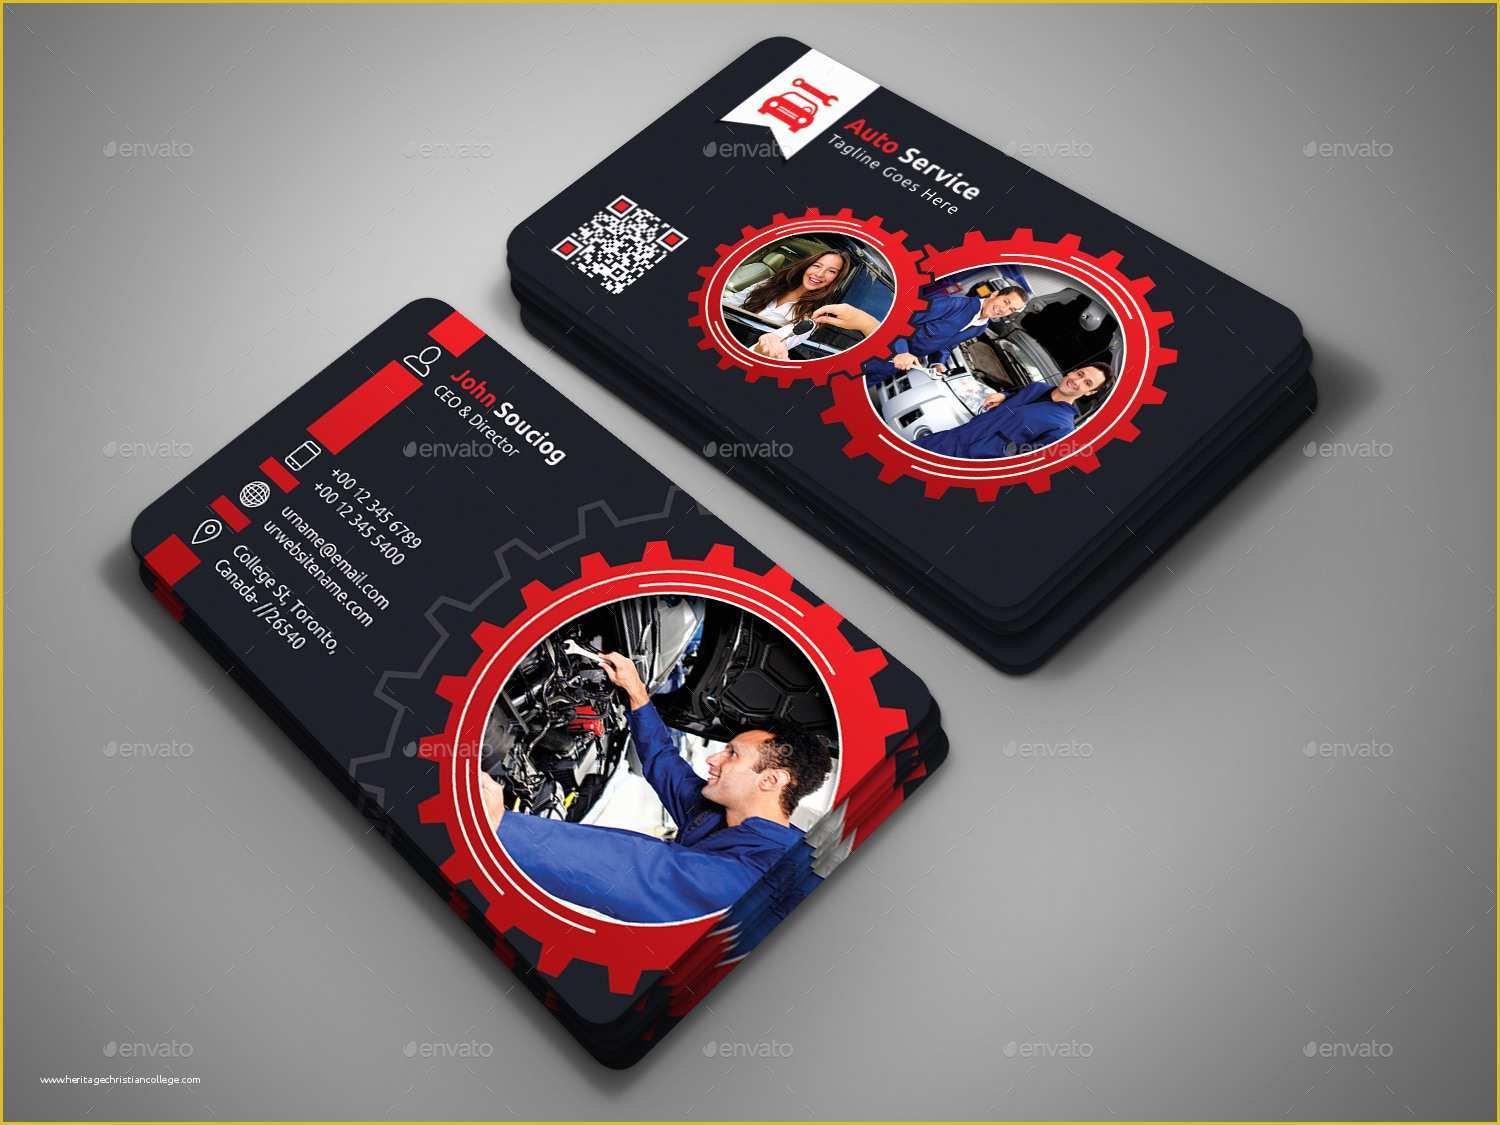 Auto Repair Business Card Templates Free Of Auto Service Business Card by Designsign